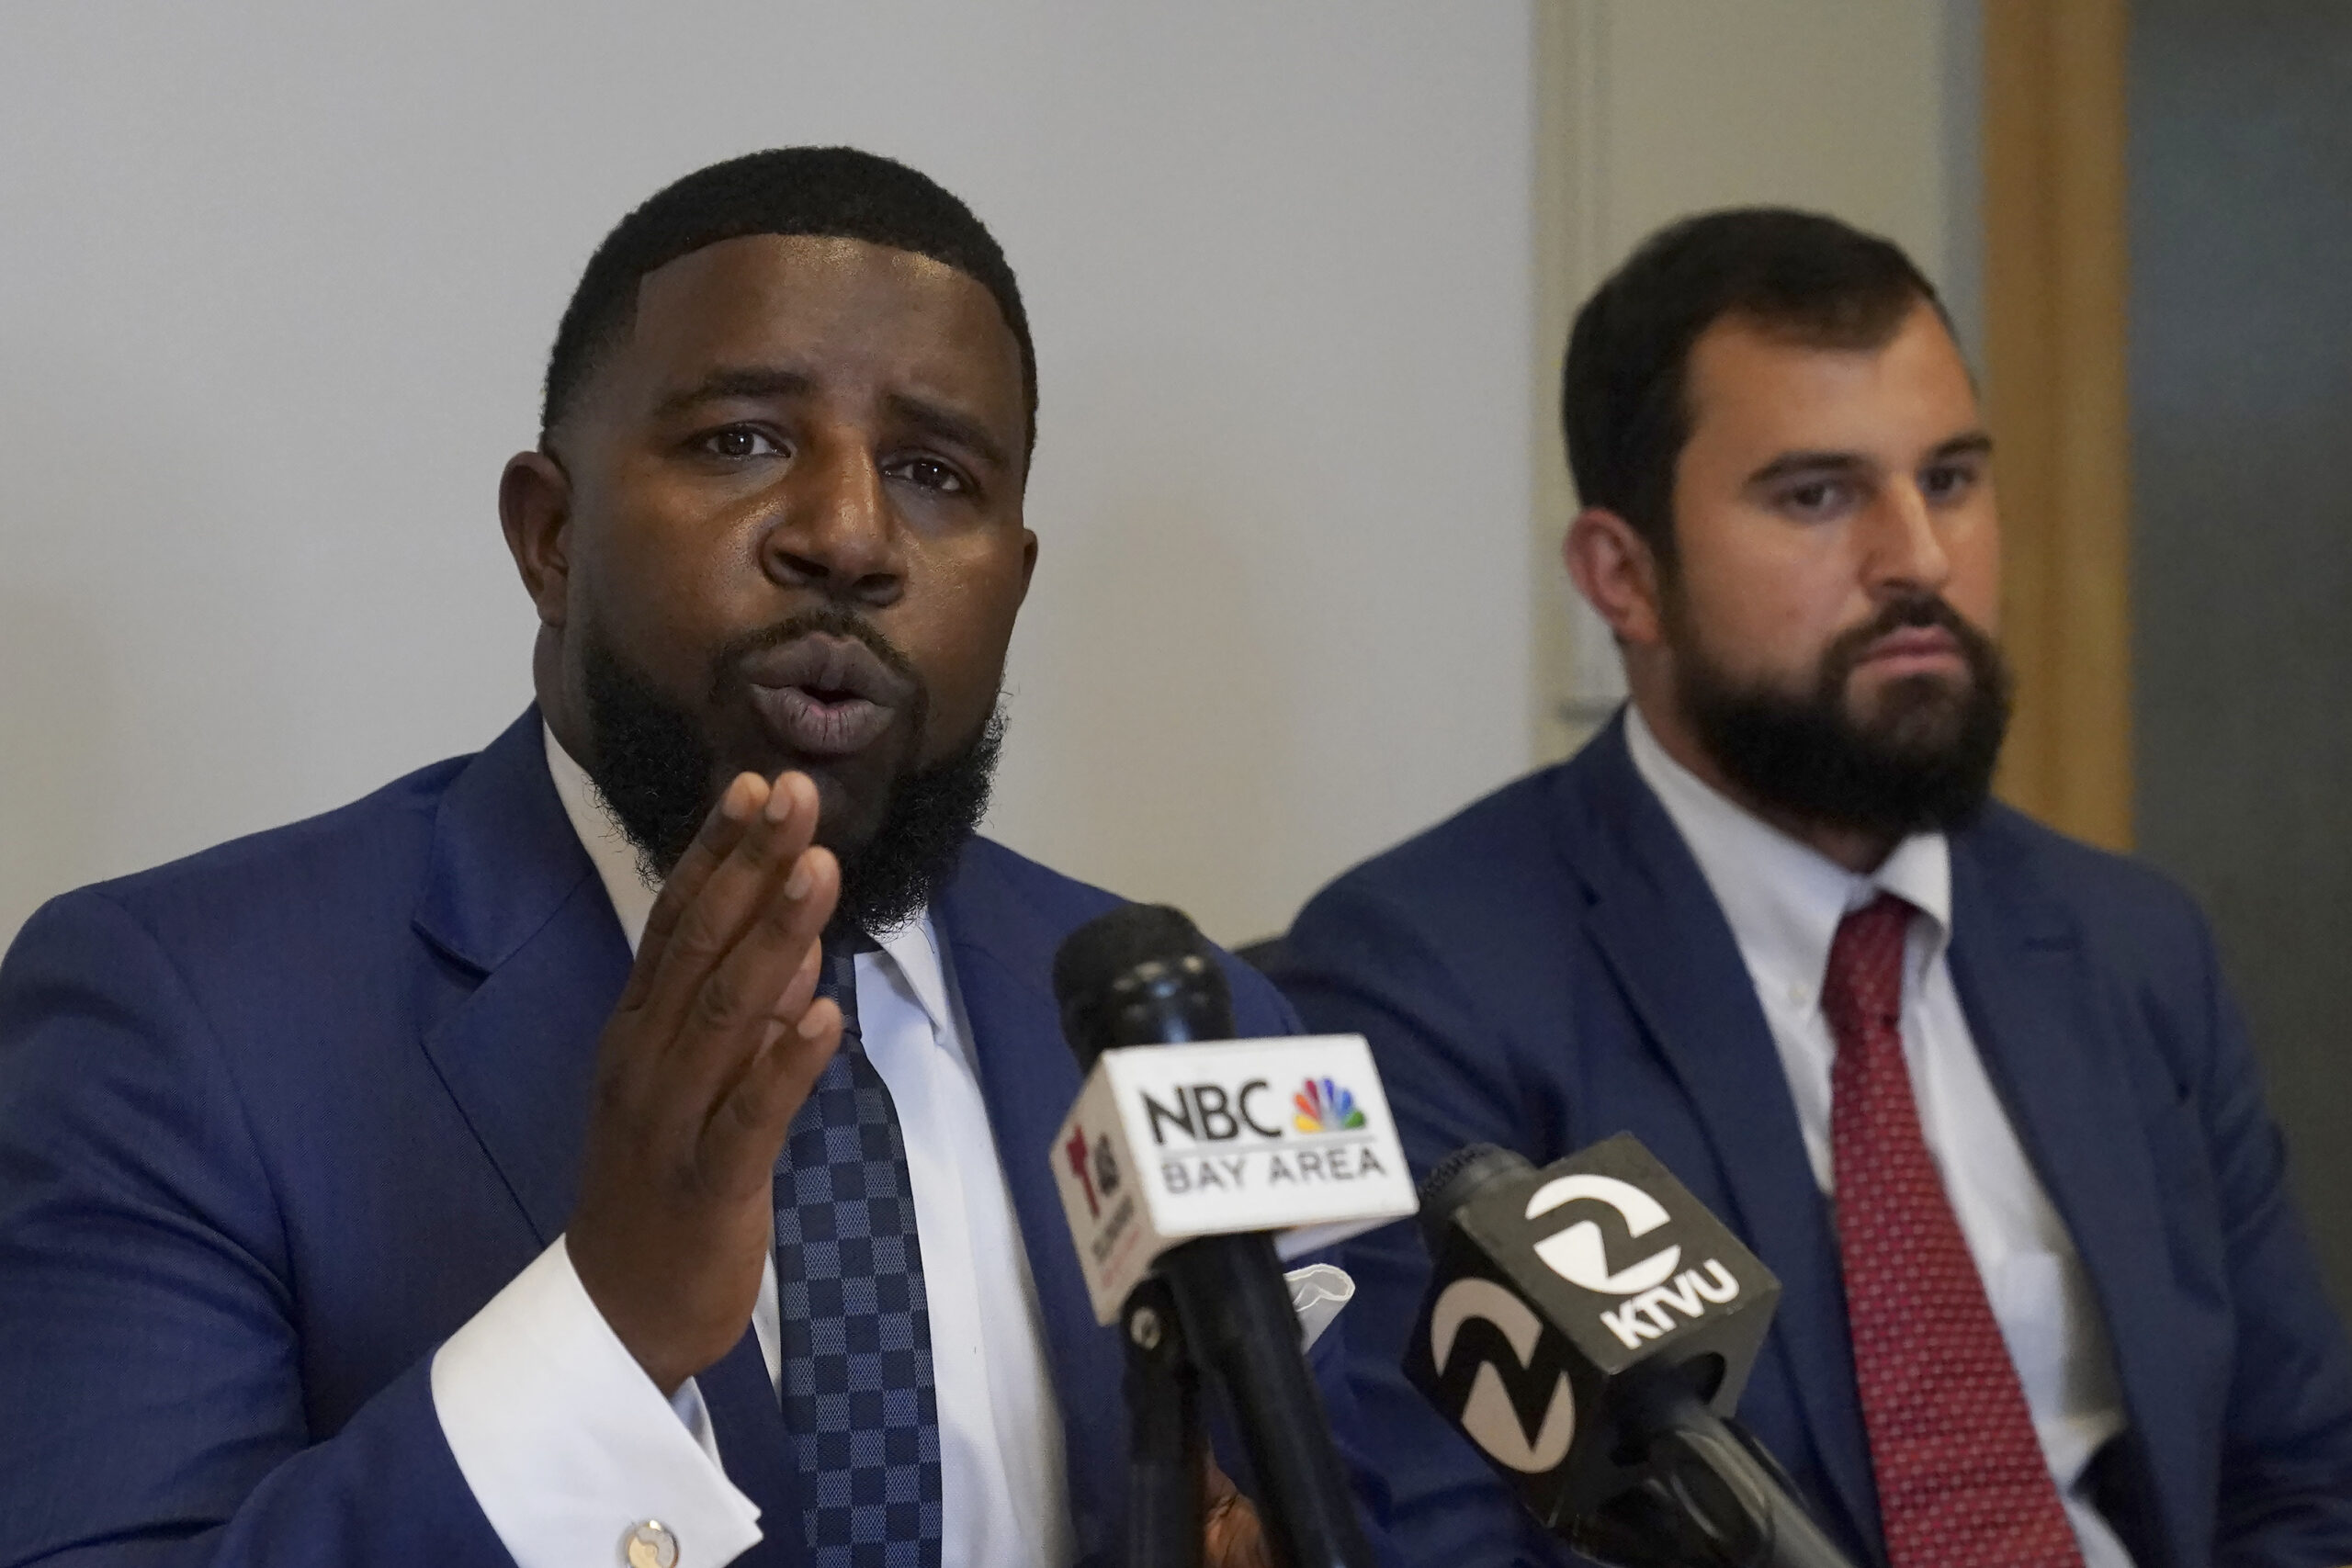 Attorneys Adanté Pointer, left, and Patrick Buelna, who represent a woman whose DNA from a sexual assault case was used by San Francisco police to arrest her in an unrelated property crime, speak during a news conference announcing their lawsuit against the city of San Francisco at their law office in Oakland, Calif., Monday, Sept. 12, 2022. (AP Photo/Jeff Chiu)